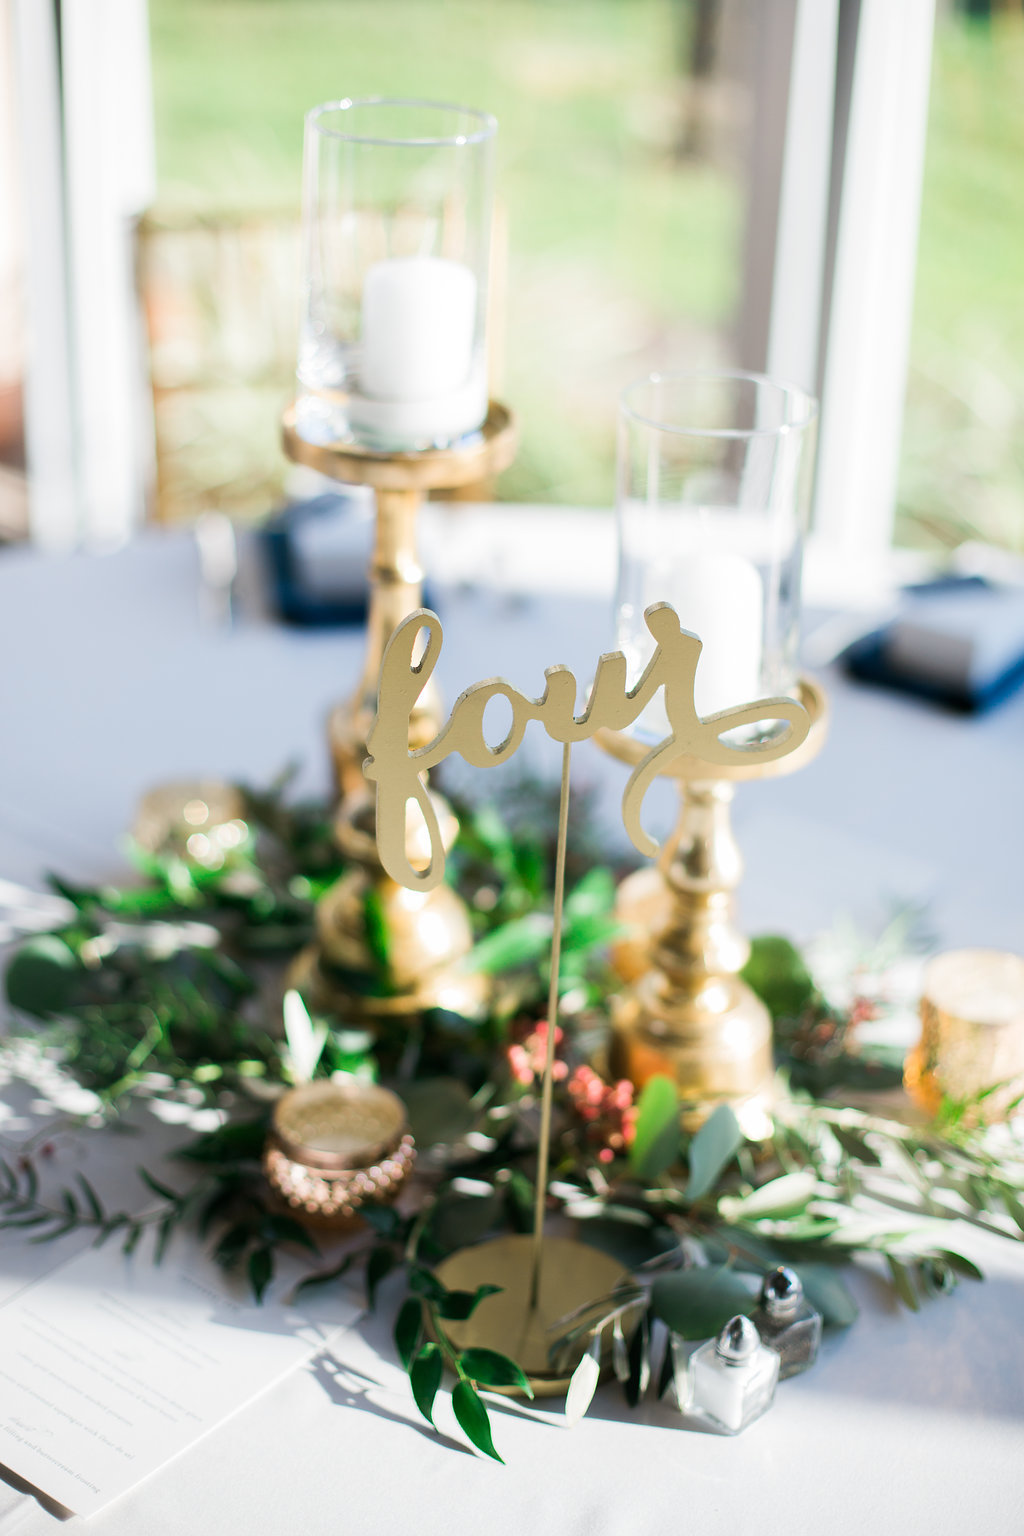 Indoor Vintage Wedding Reception with Greenery Centerpiece and Gold Pillar Candlestick Holders, White Linens and Gold Wooden Table Number | Naples Wedding Photographer Kera Photography